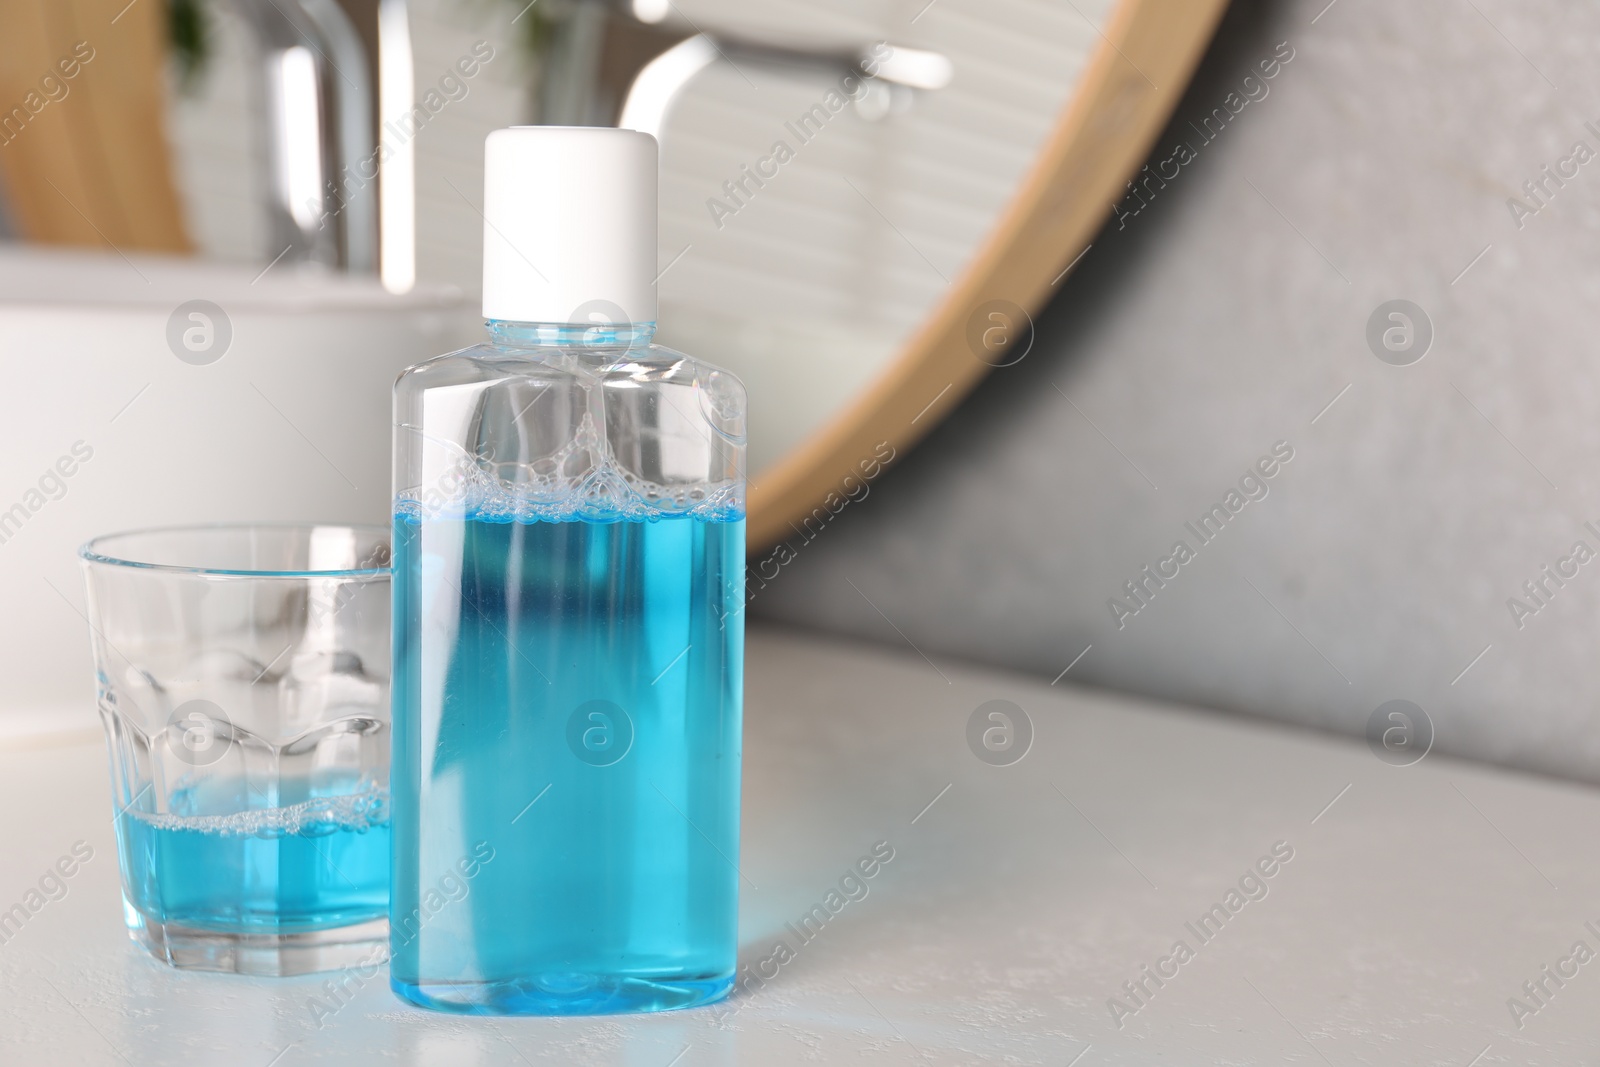 Photo of Bottle and glass of mouthwash on white countertop in bathroom, space for text